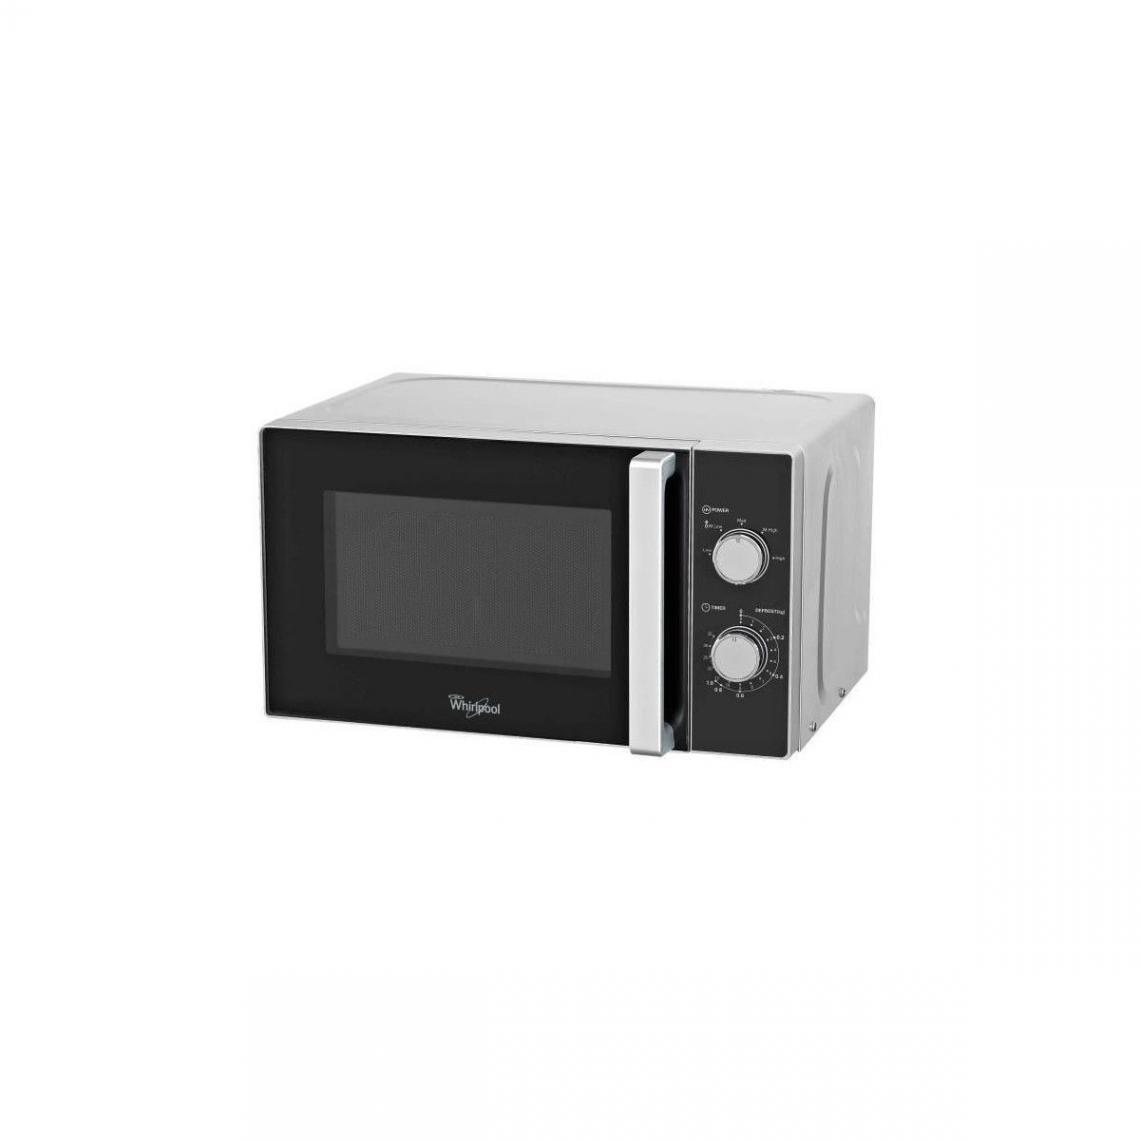 whirlpool - Micro-ondes Pose Libre 20l Whirlpool 800w 43.3cm, Mwo618sil1 - Four micro-ondes